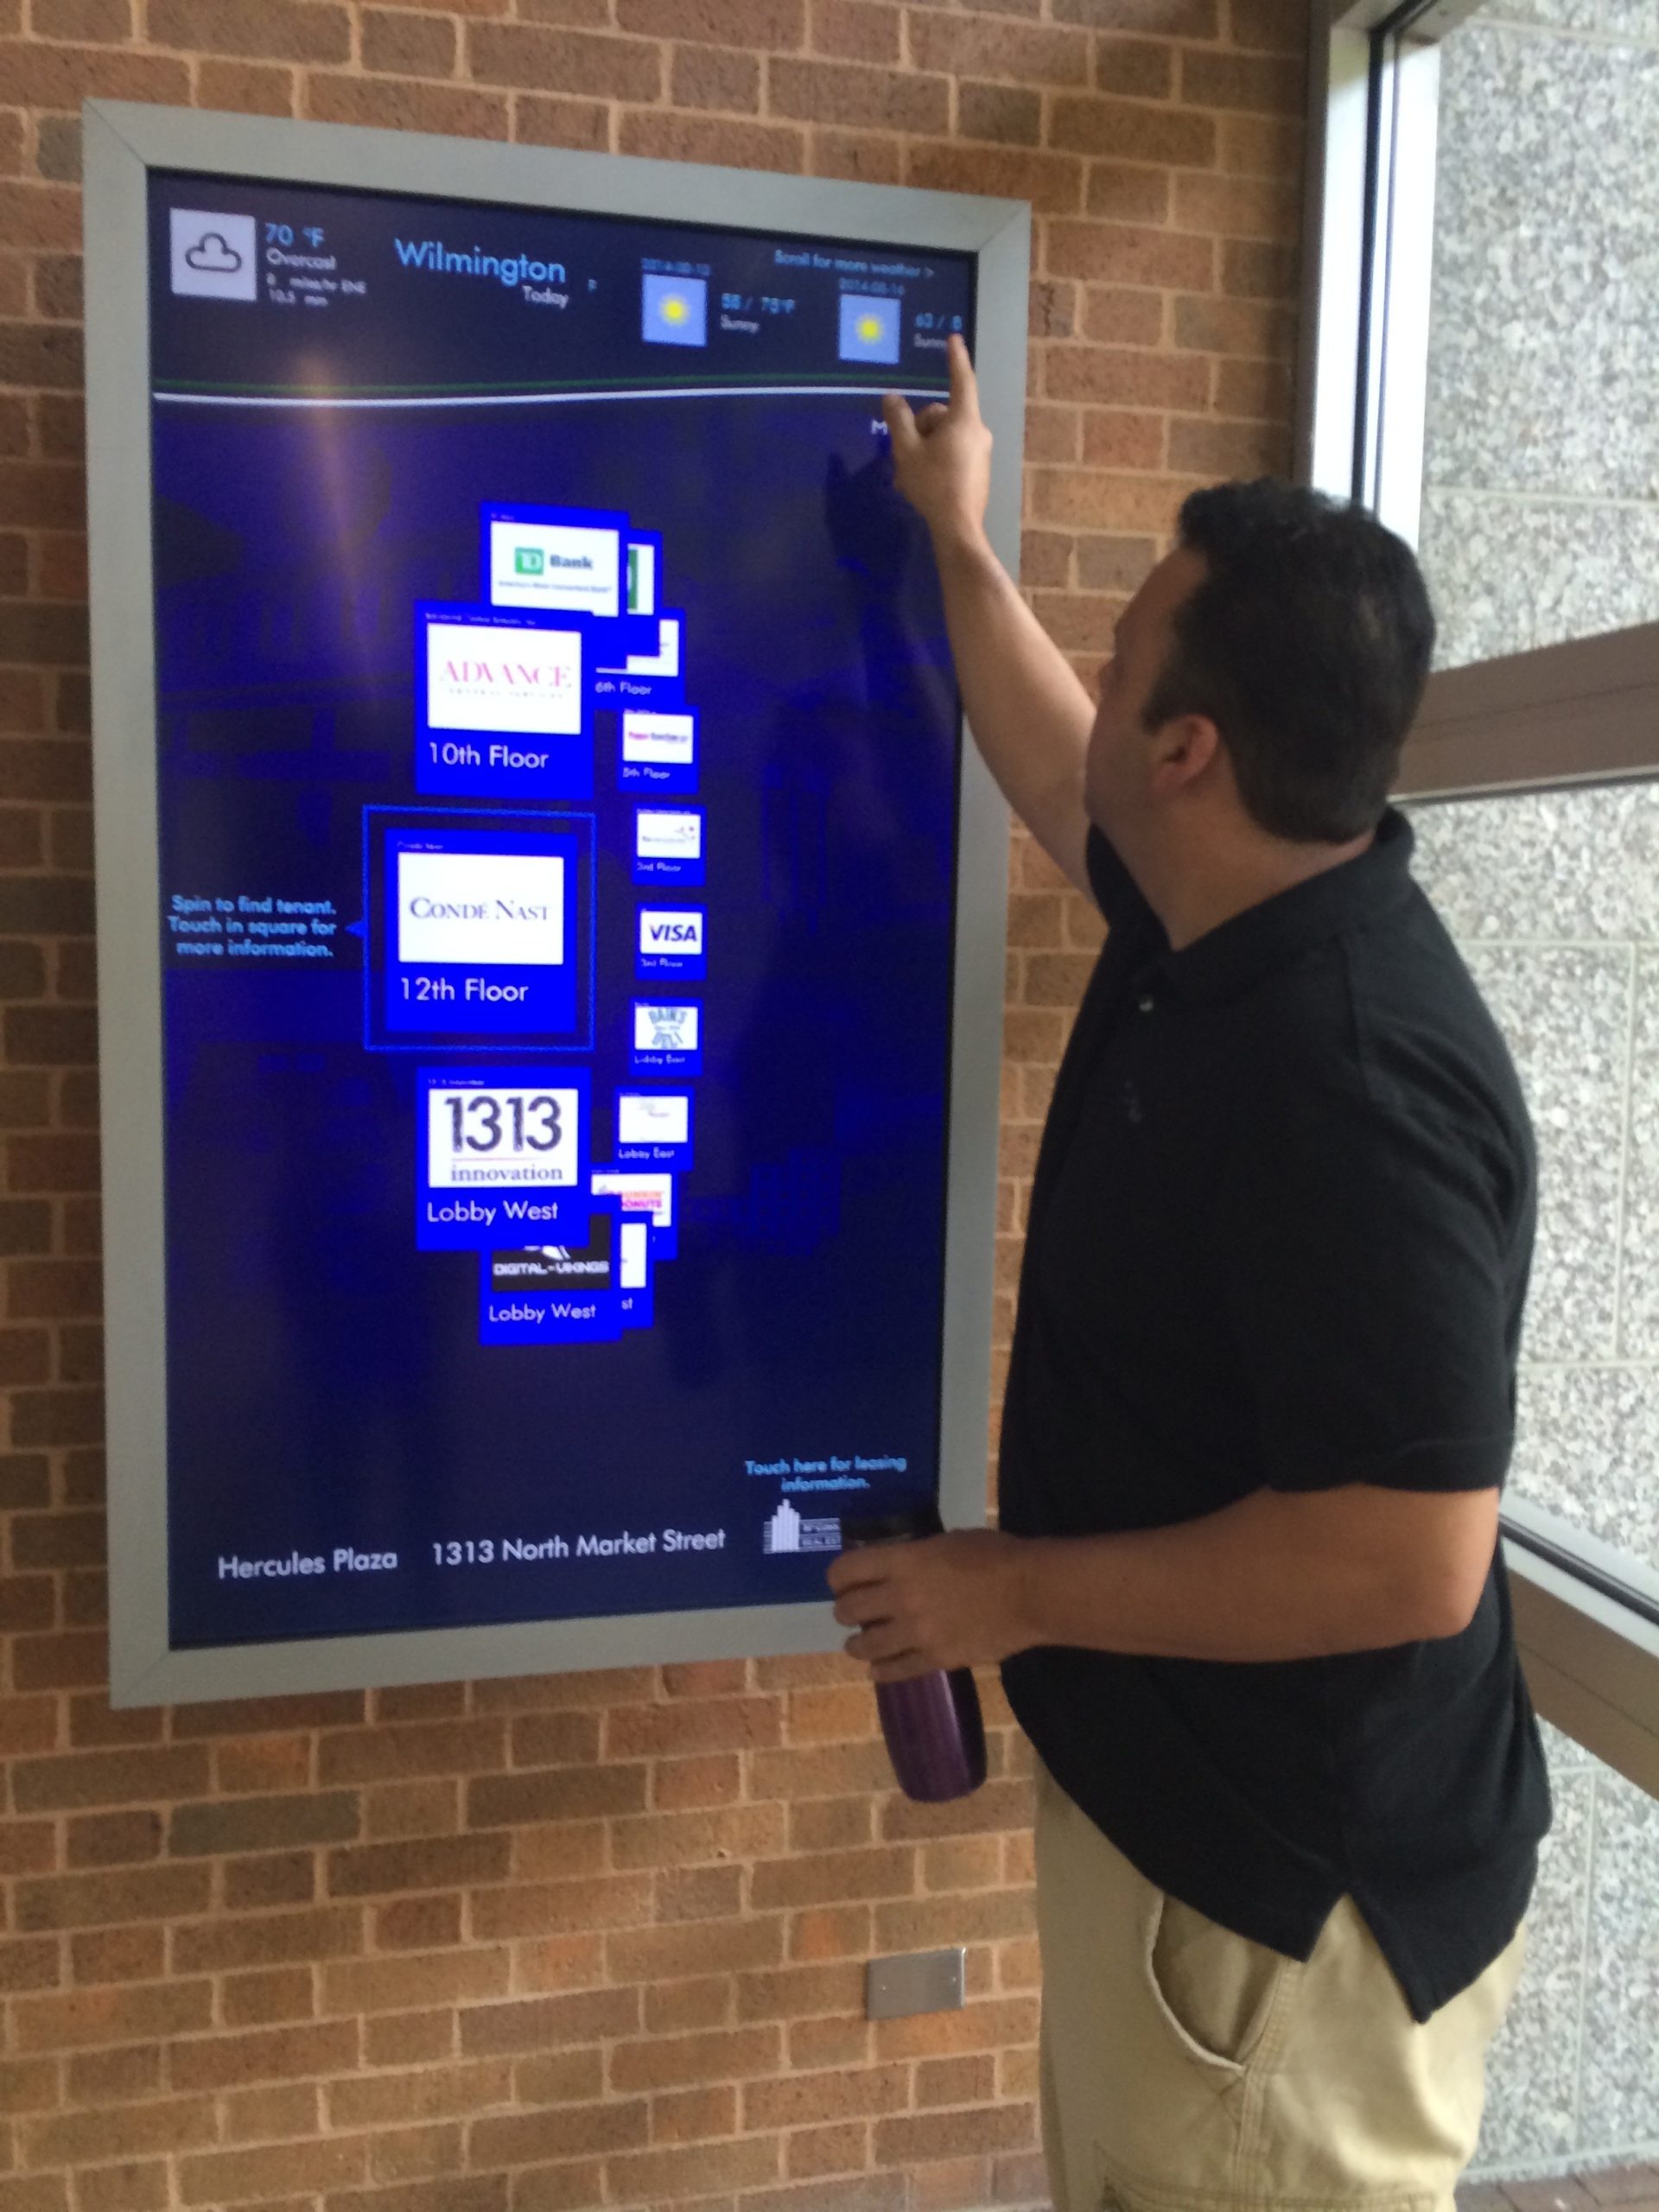 Richard Prieto uses the touch screen system his company installed at the Hercules Building, 1313 Market St., Wilmington.